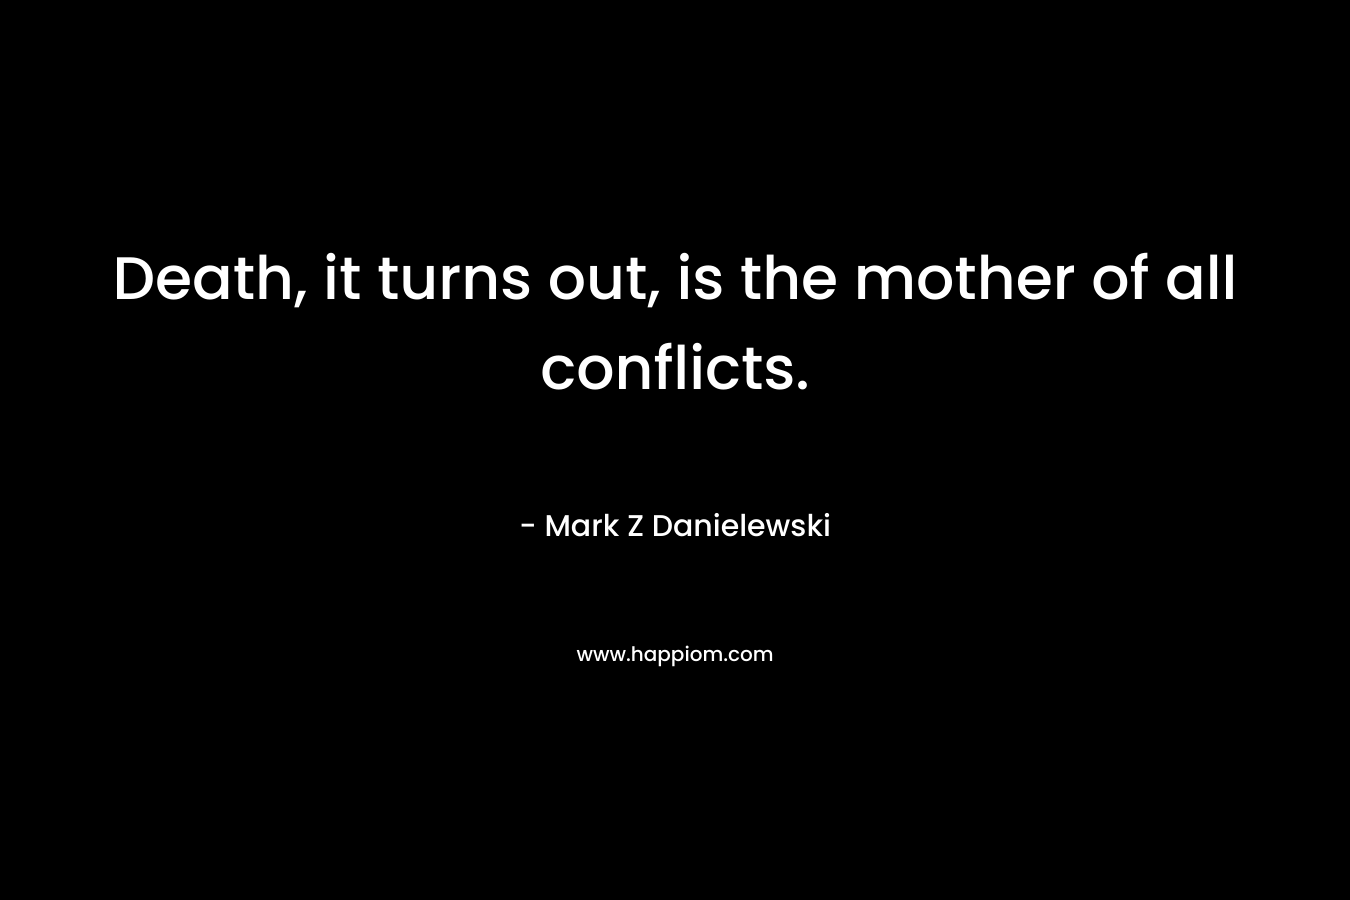 Death, it turns out, is the mother of all conflicts.